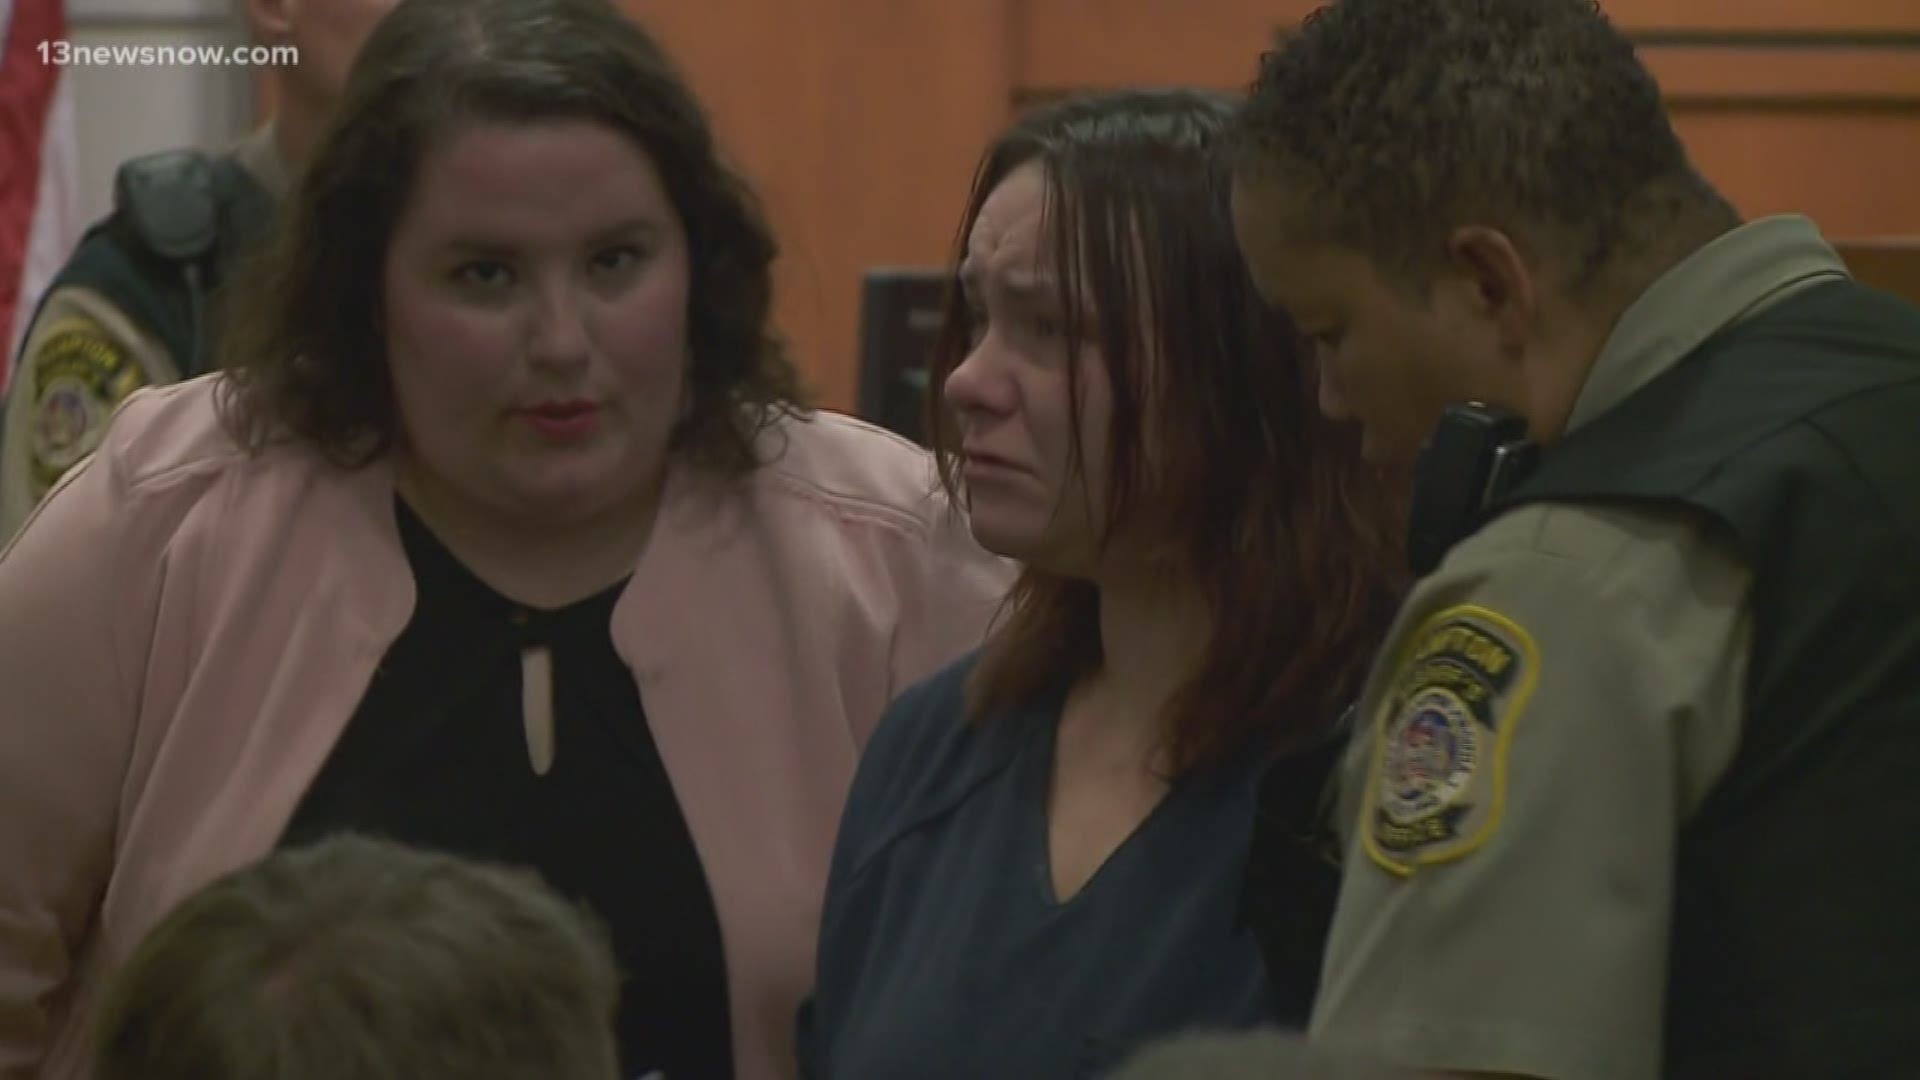 Julia Tomlin, the mother of two-year-old Noah Tomlin, was denied bond on Monday. She will remain in jail as prosecutors gather more evidence. The prosecutor said more charges against the mother are pending.